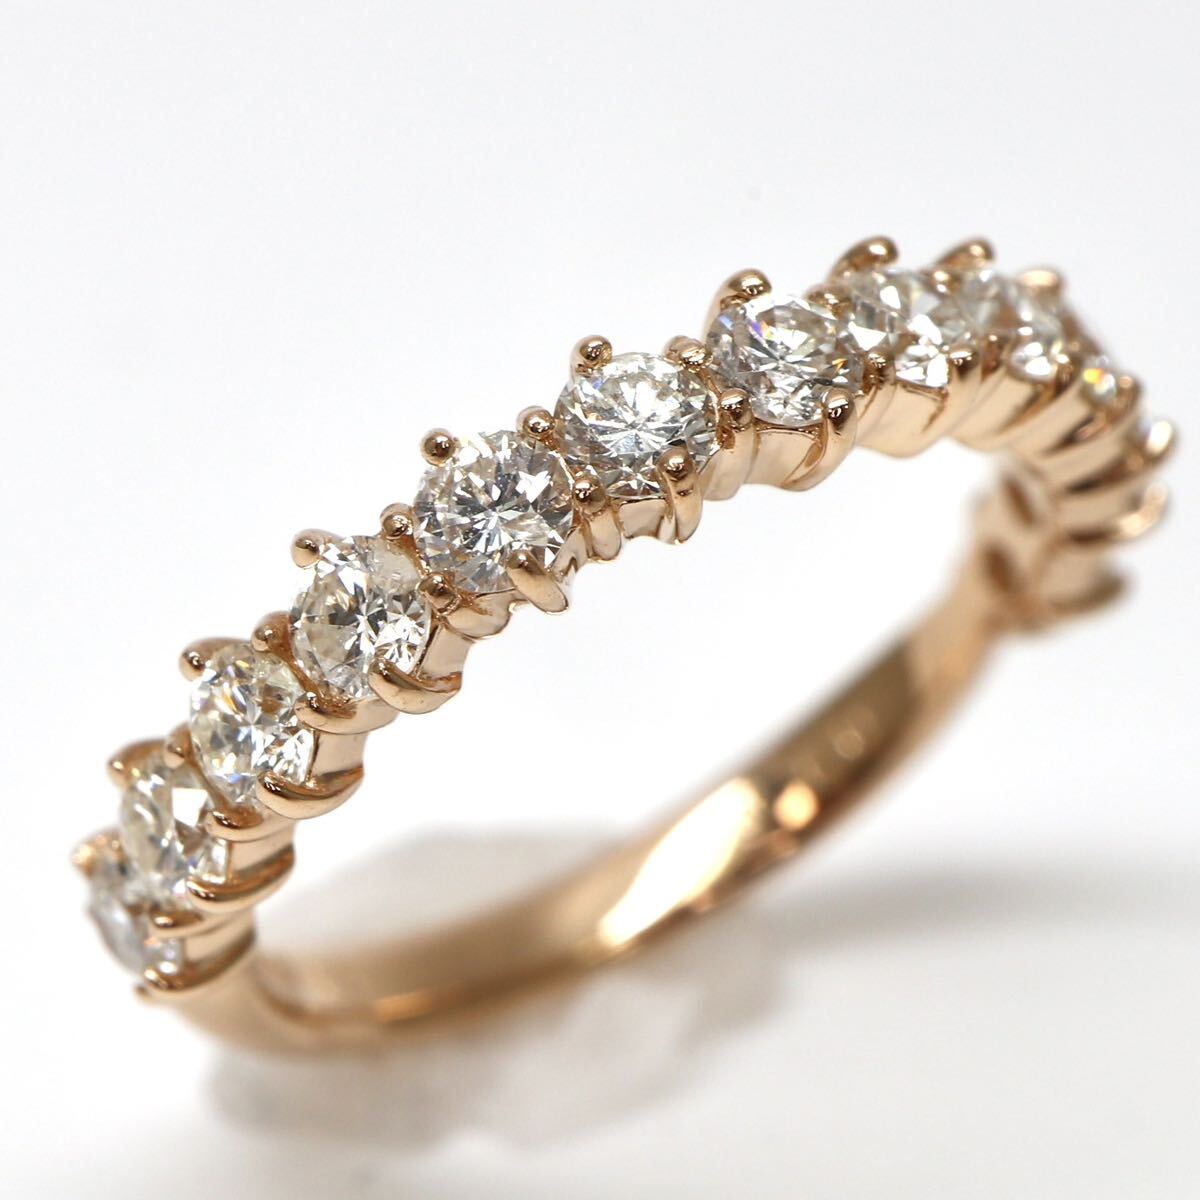  gorgeous!!*K18 natural diamond half Eternity ring *M approximately 1.7g approximately 4.5 number diamond ring ring EA8/EA8